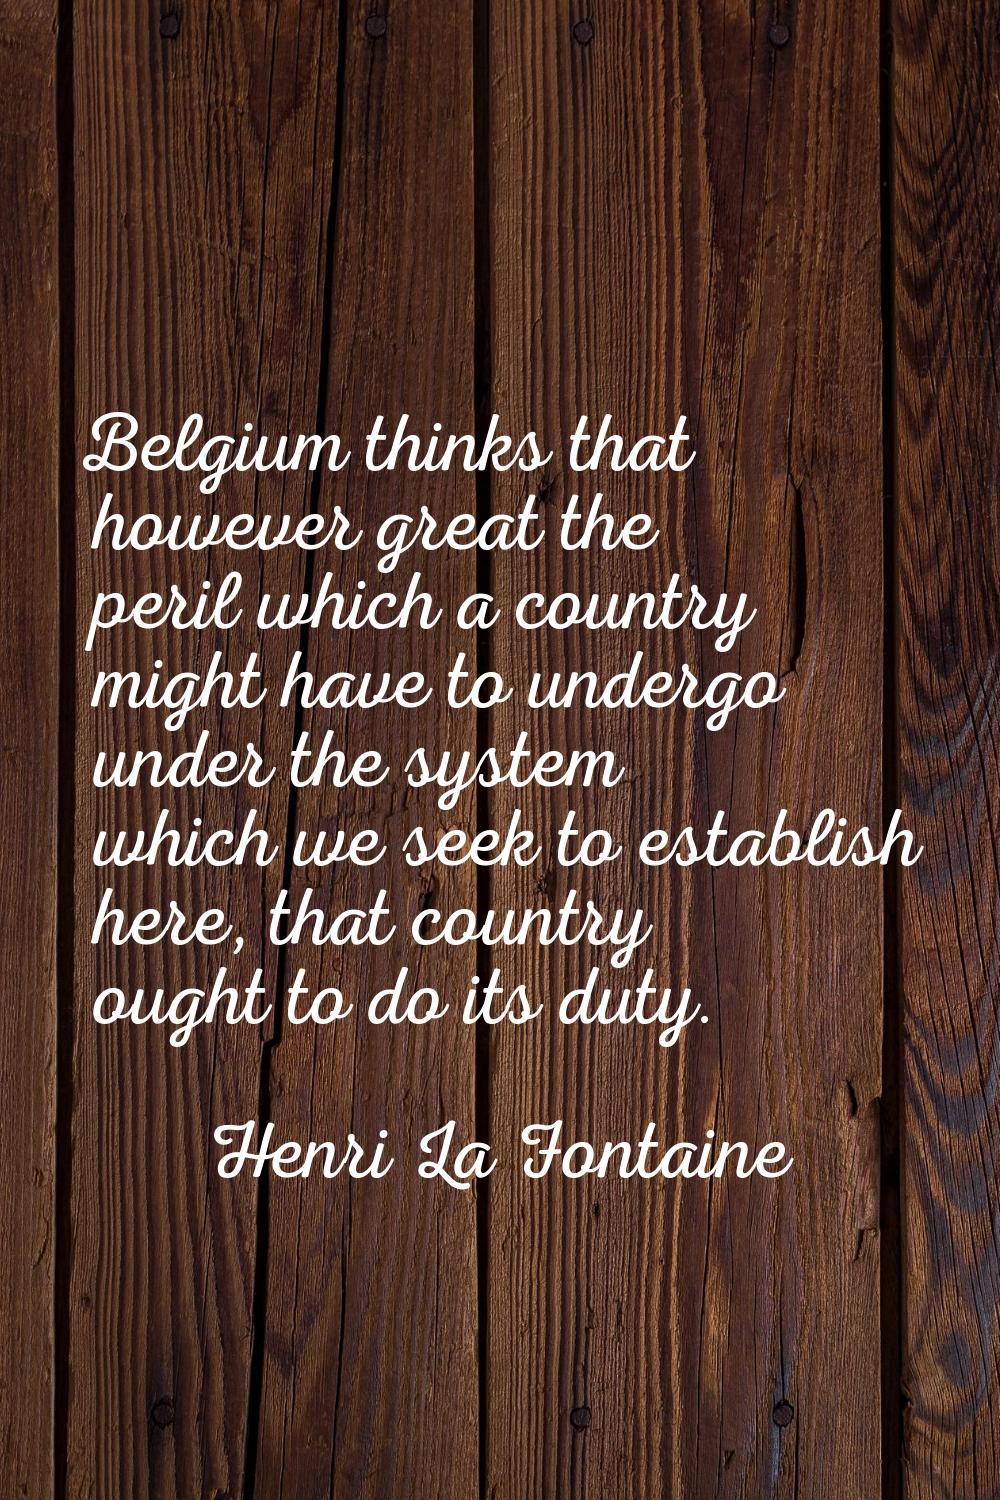 Belgium thinks that however great the peril which a country might have to undergo under the system 